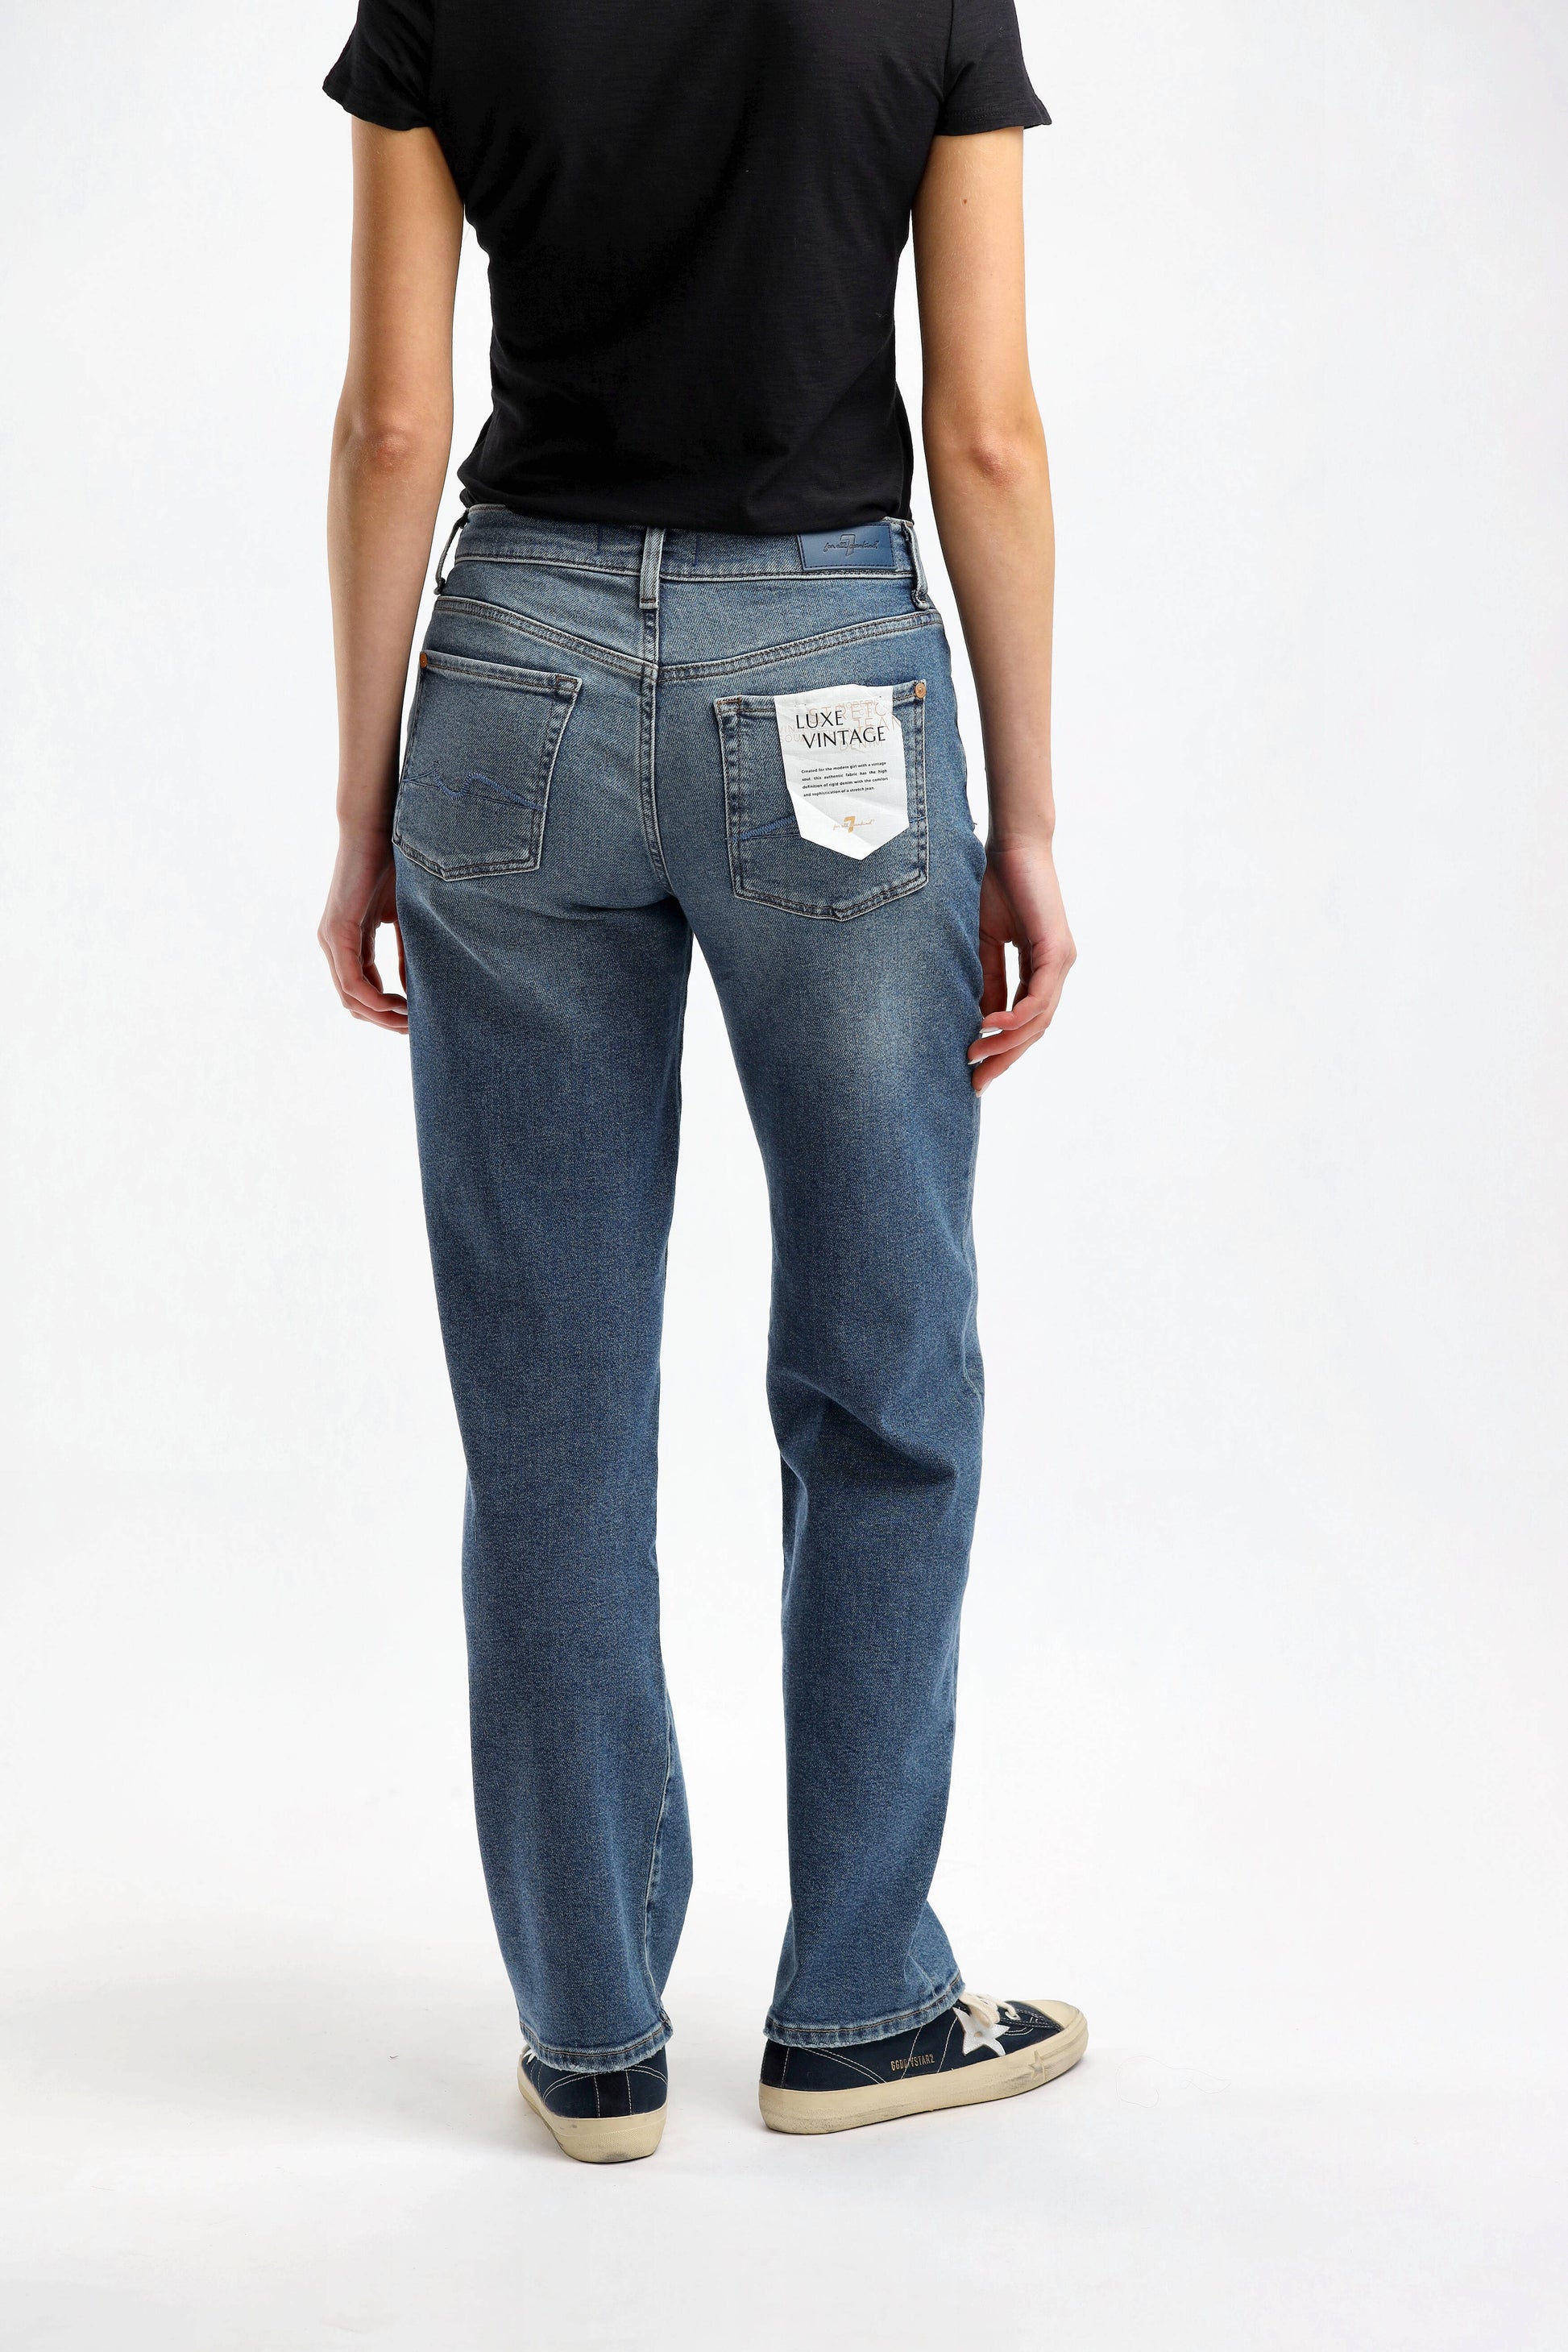 Jeans Ellie Luxe Vintage in Dark Blue7 For All Mankind - Anita Hass